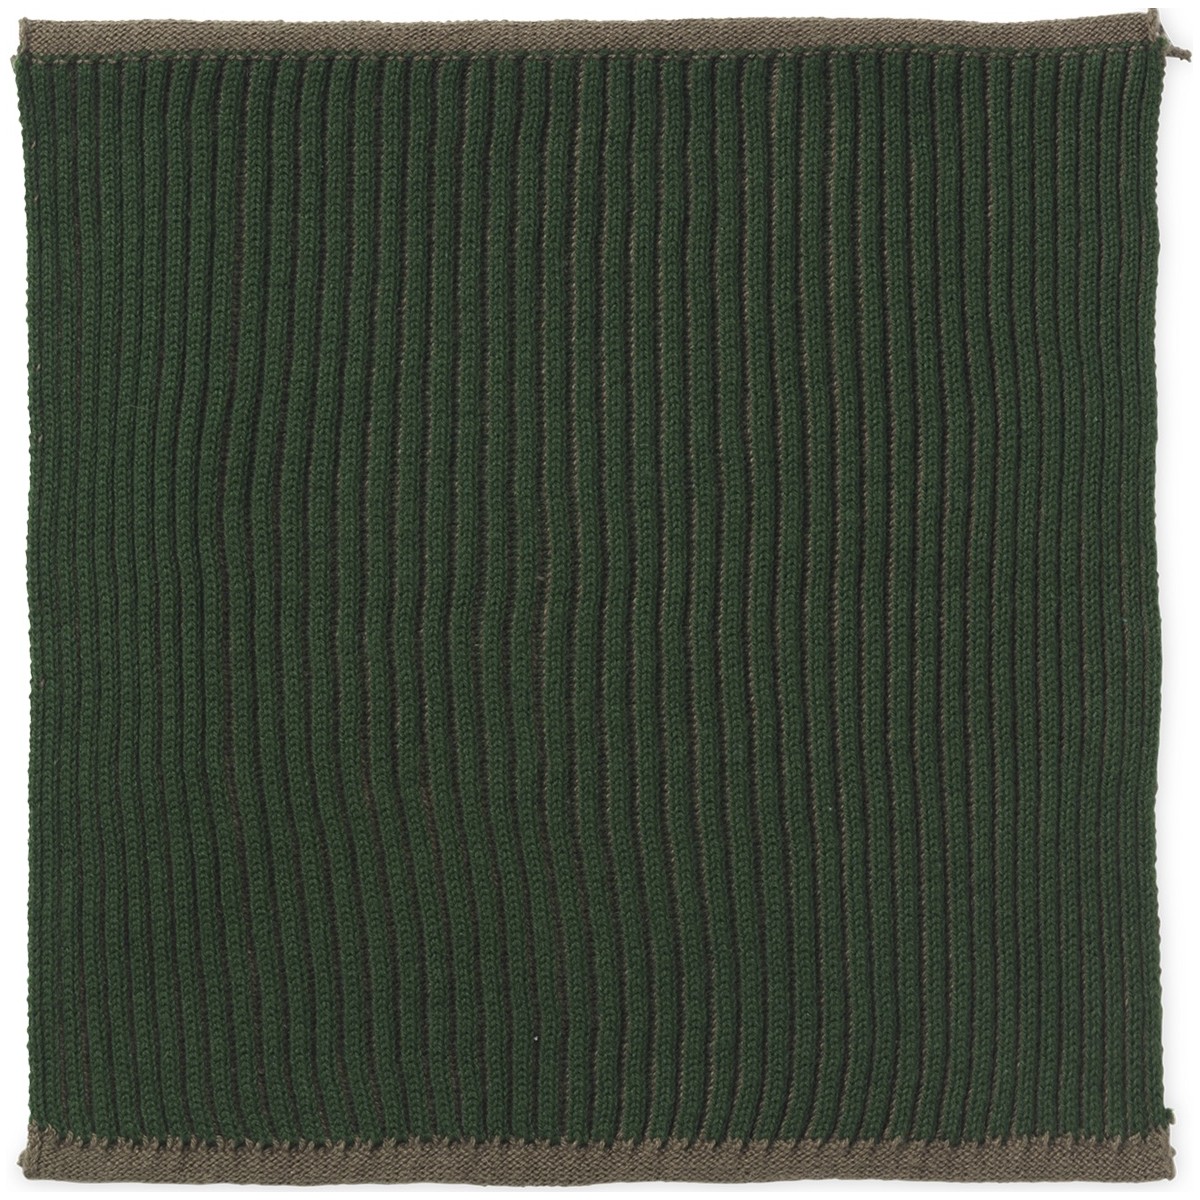 SOLD OUT Twofold dish cloth - dark green